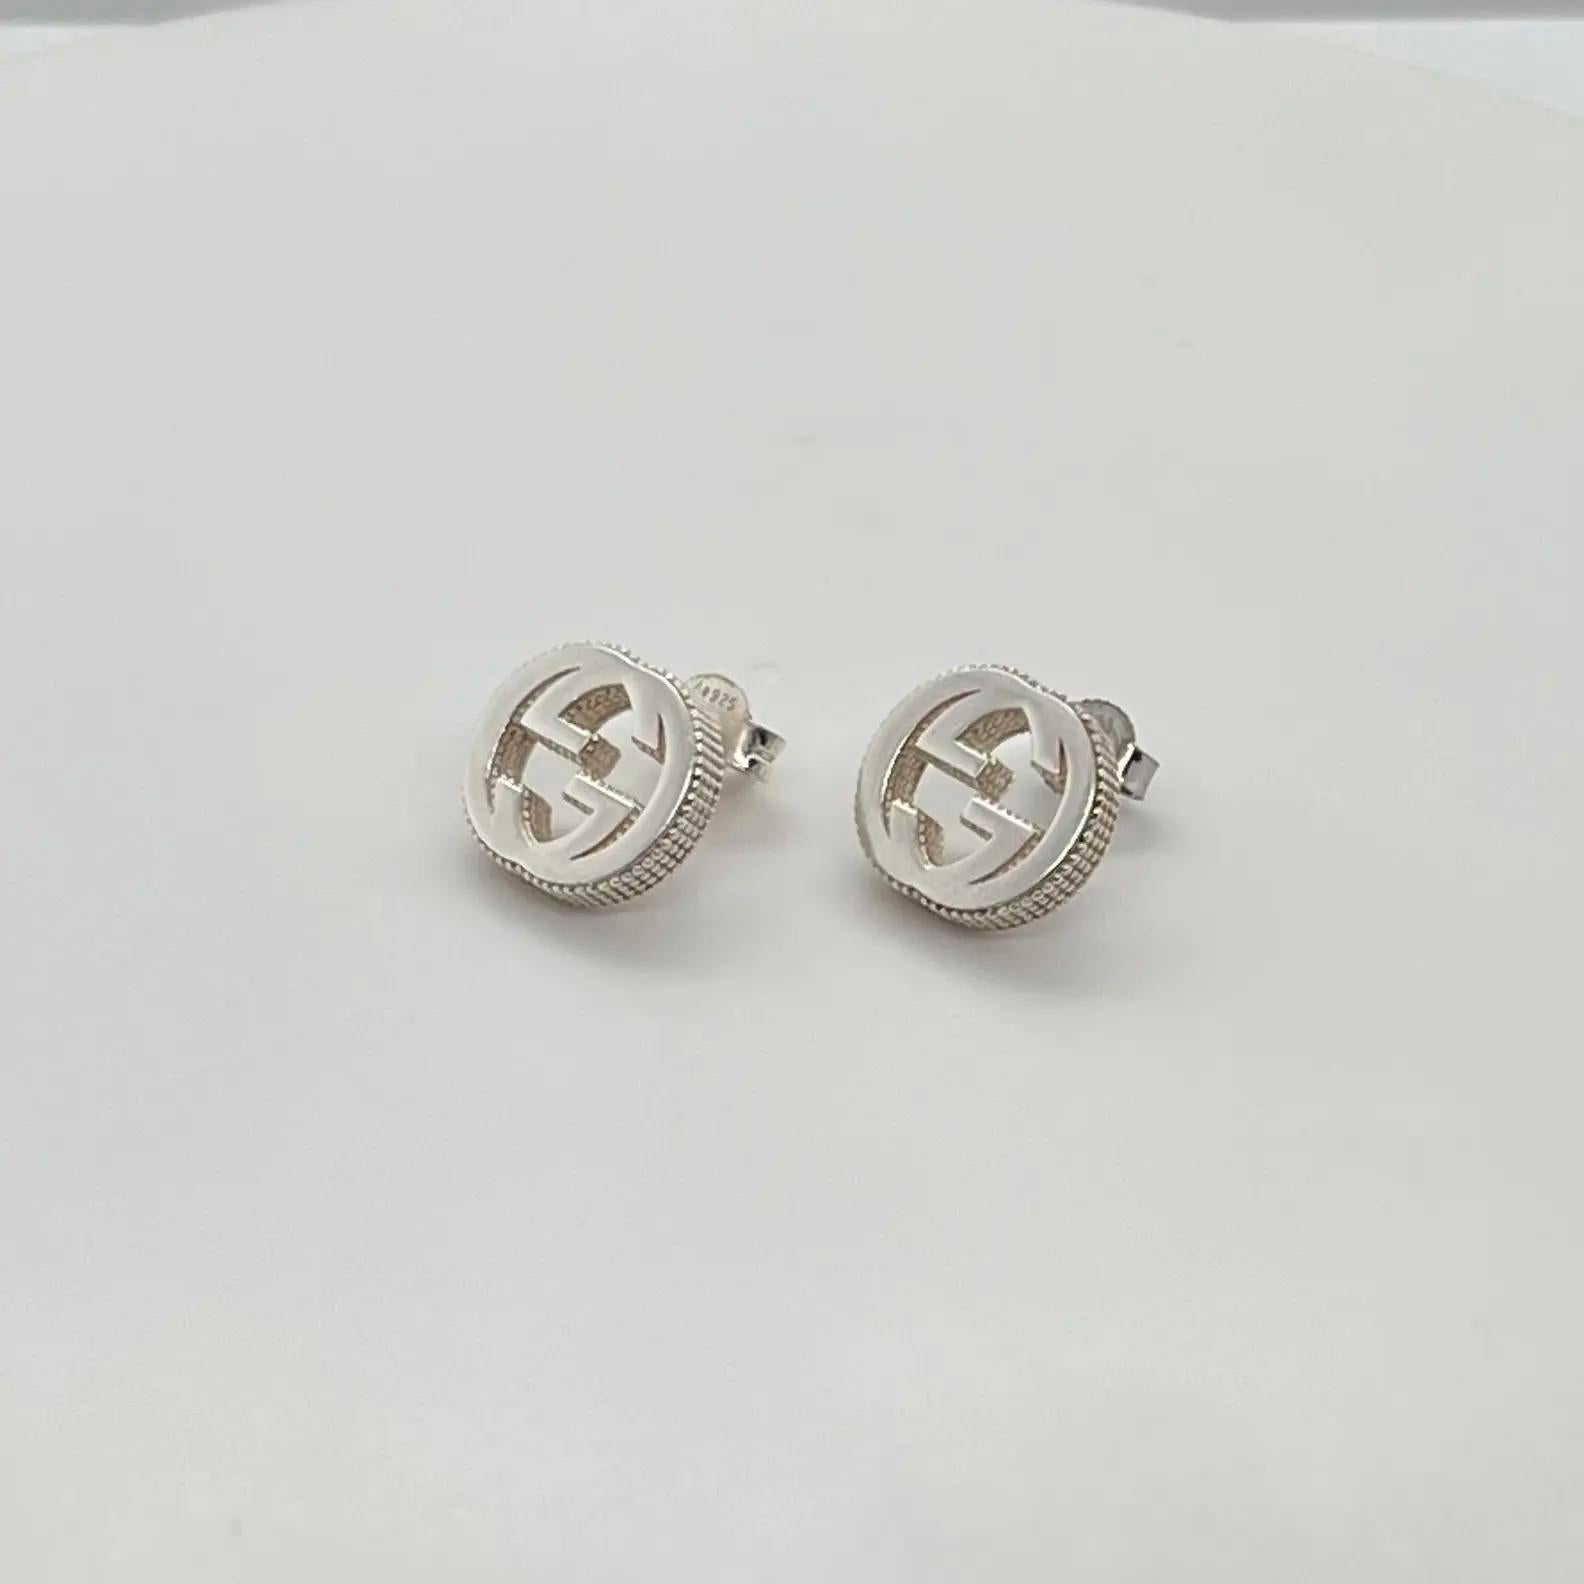 These gorgeous GUCCI interlocking G stud earrings are designed in 925 sterling silver with a textured outline. Earring size: 11.5mm x 12.7mm. Total weight: 5.45 grams. Comes with one Gucci stamped push back closure and one regular silver pushback.